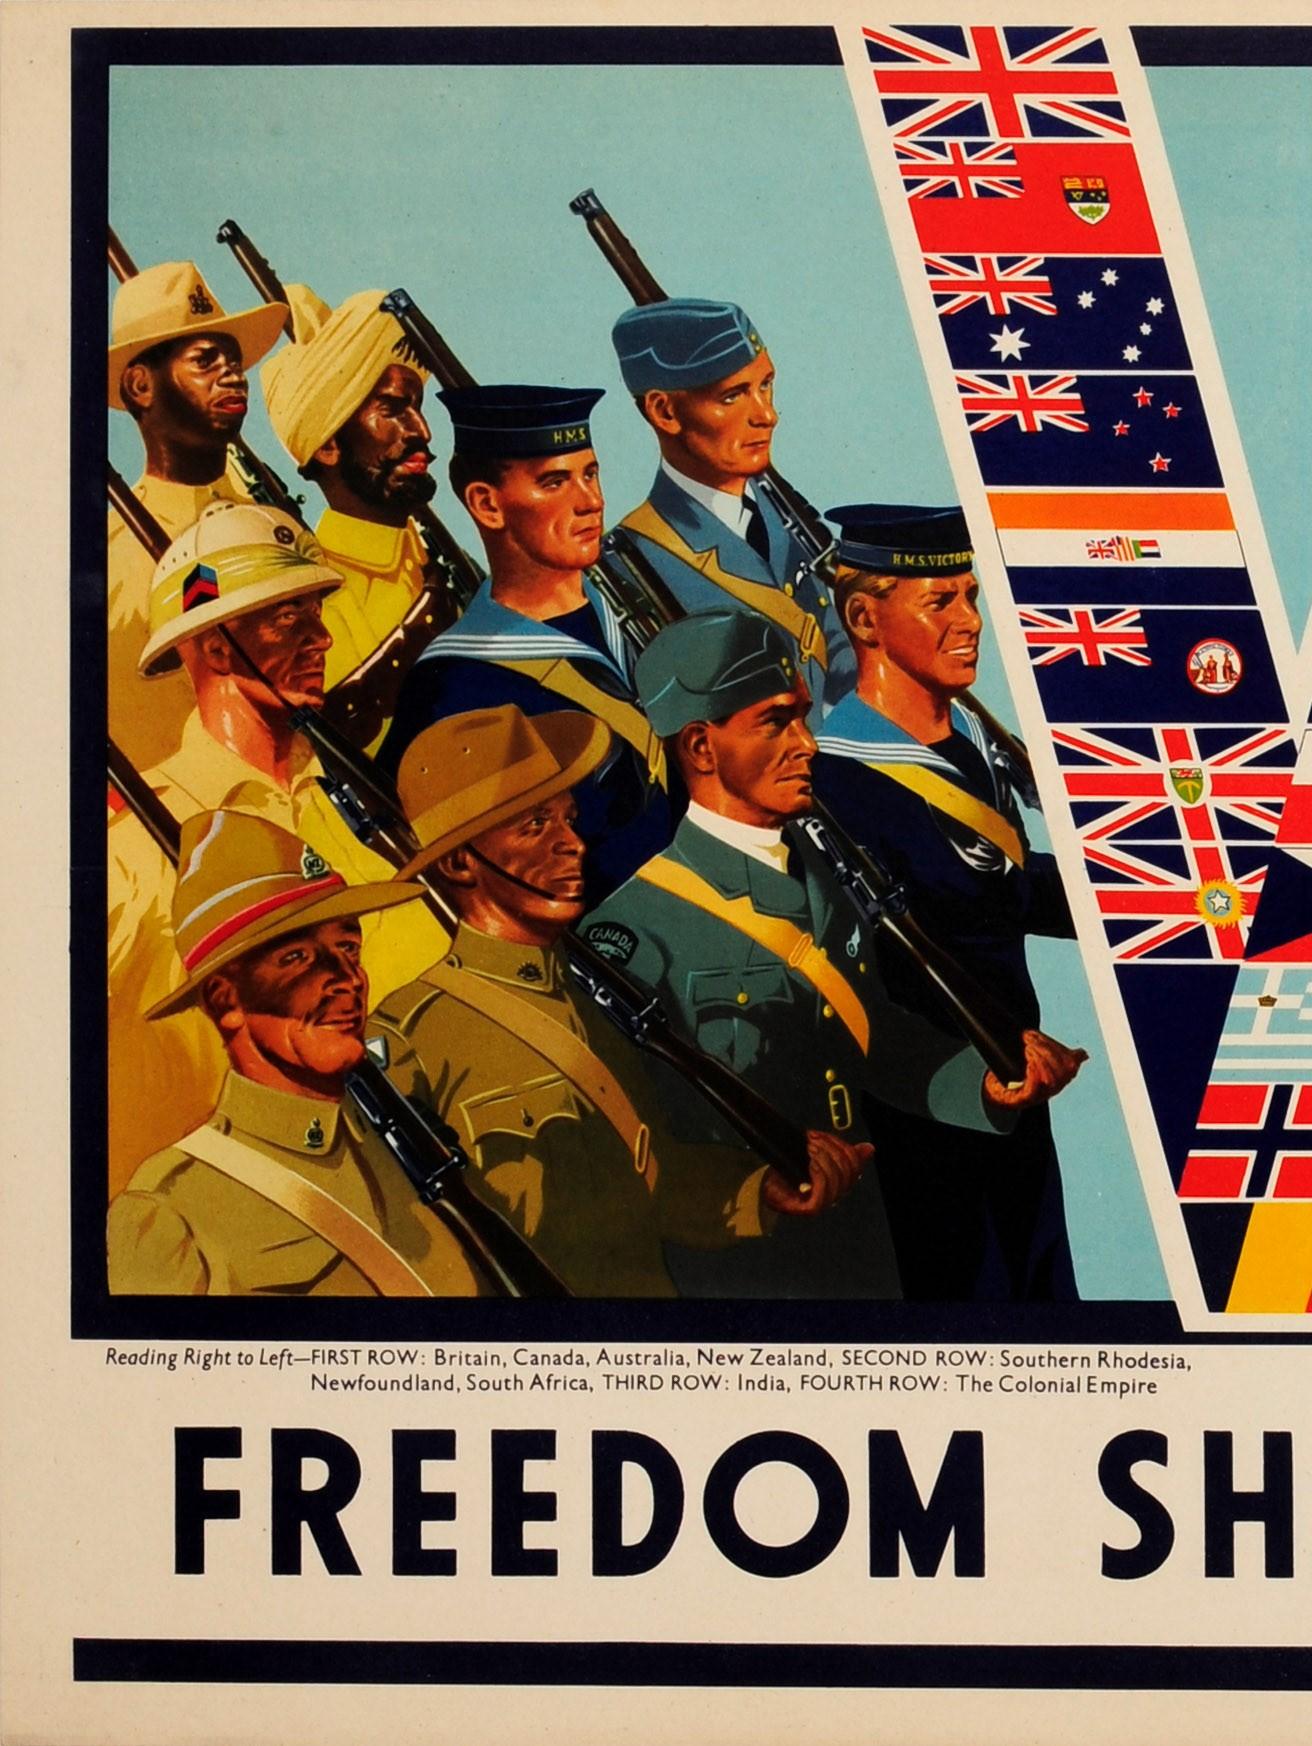 Original vintage World War Two propaganda poster - Freedom Shall Prevail! - featuring flags of the Allied nations forming a V for victory in the centre with troops in their national military uniform and holding rifle guns on both sides against a